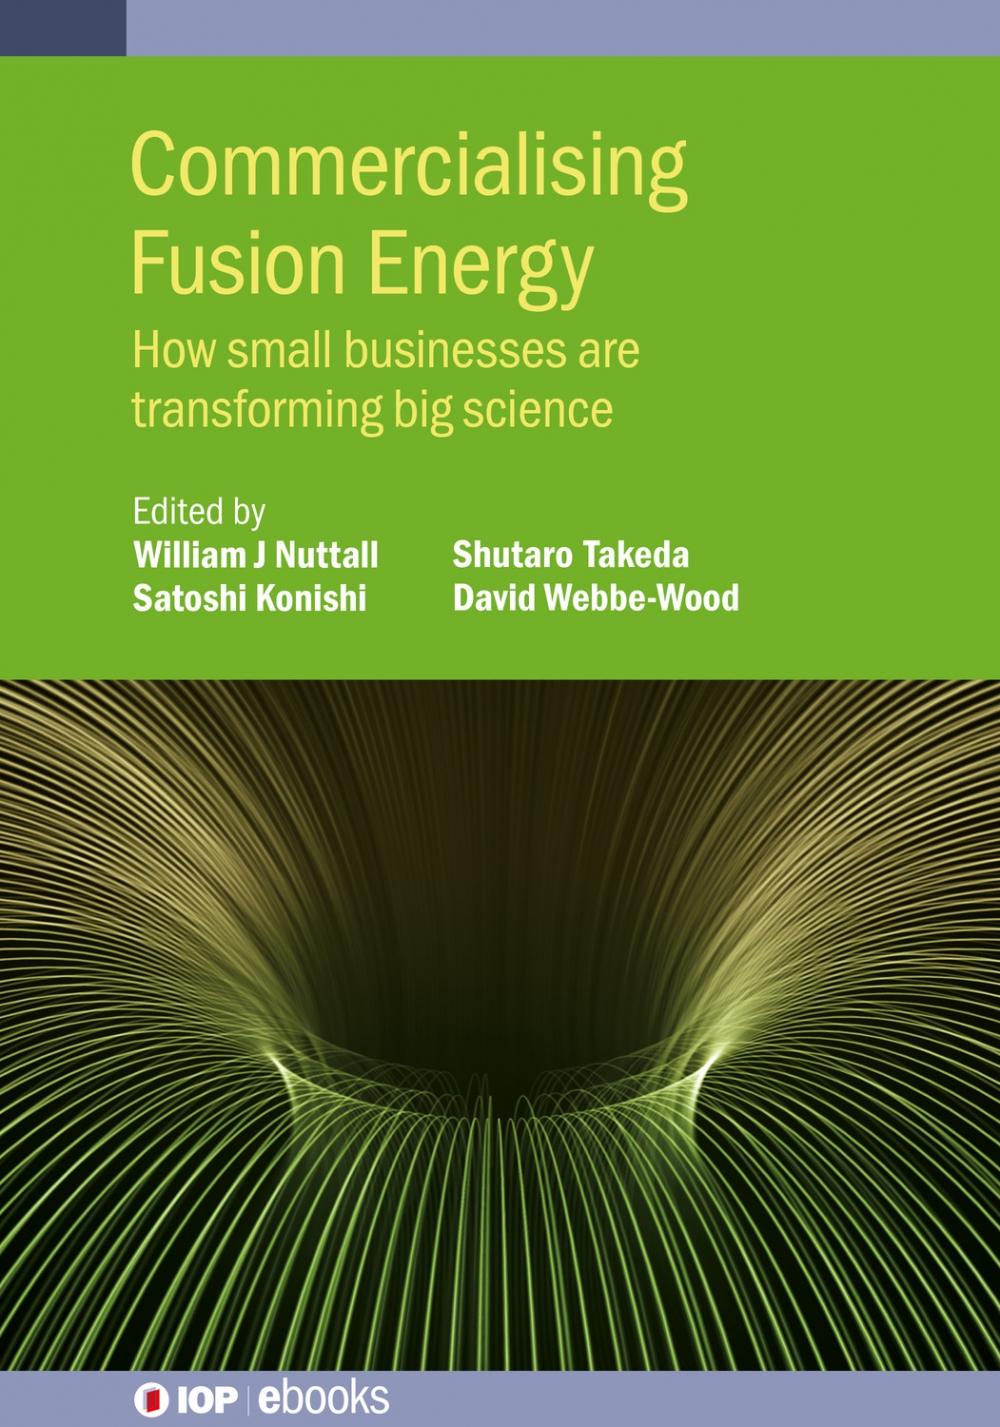 (Book) Commercialising Fusion – How small businesses are transforming big science